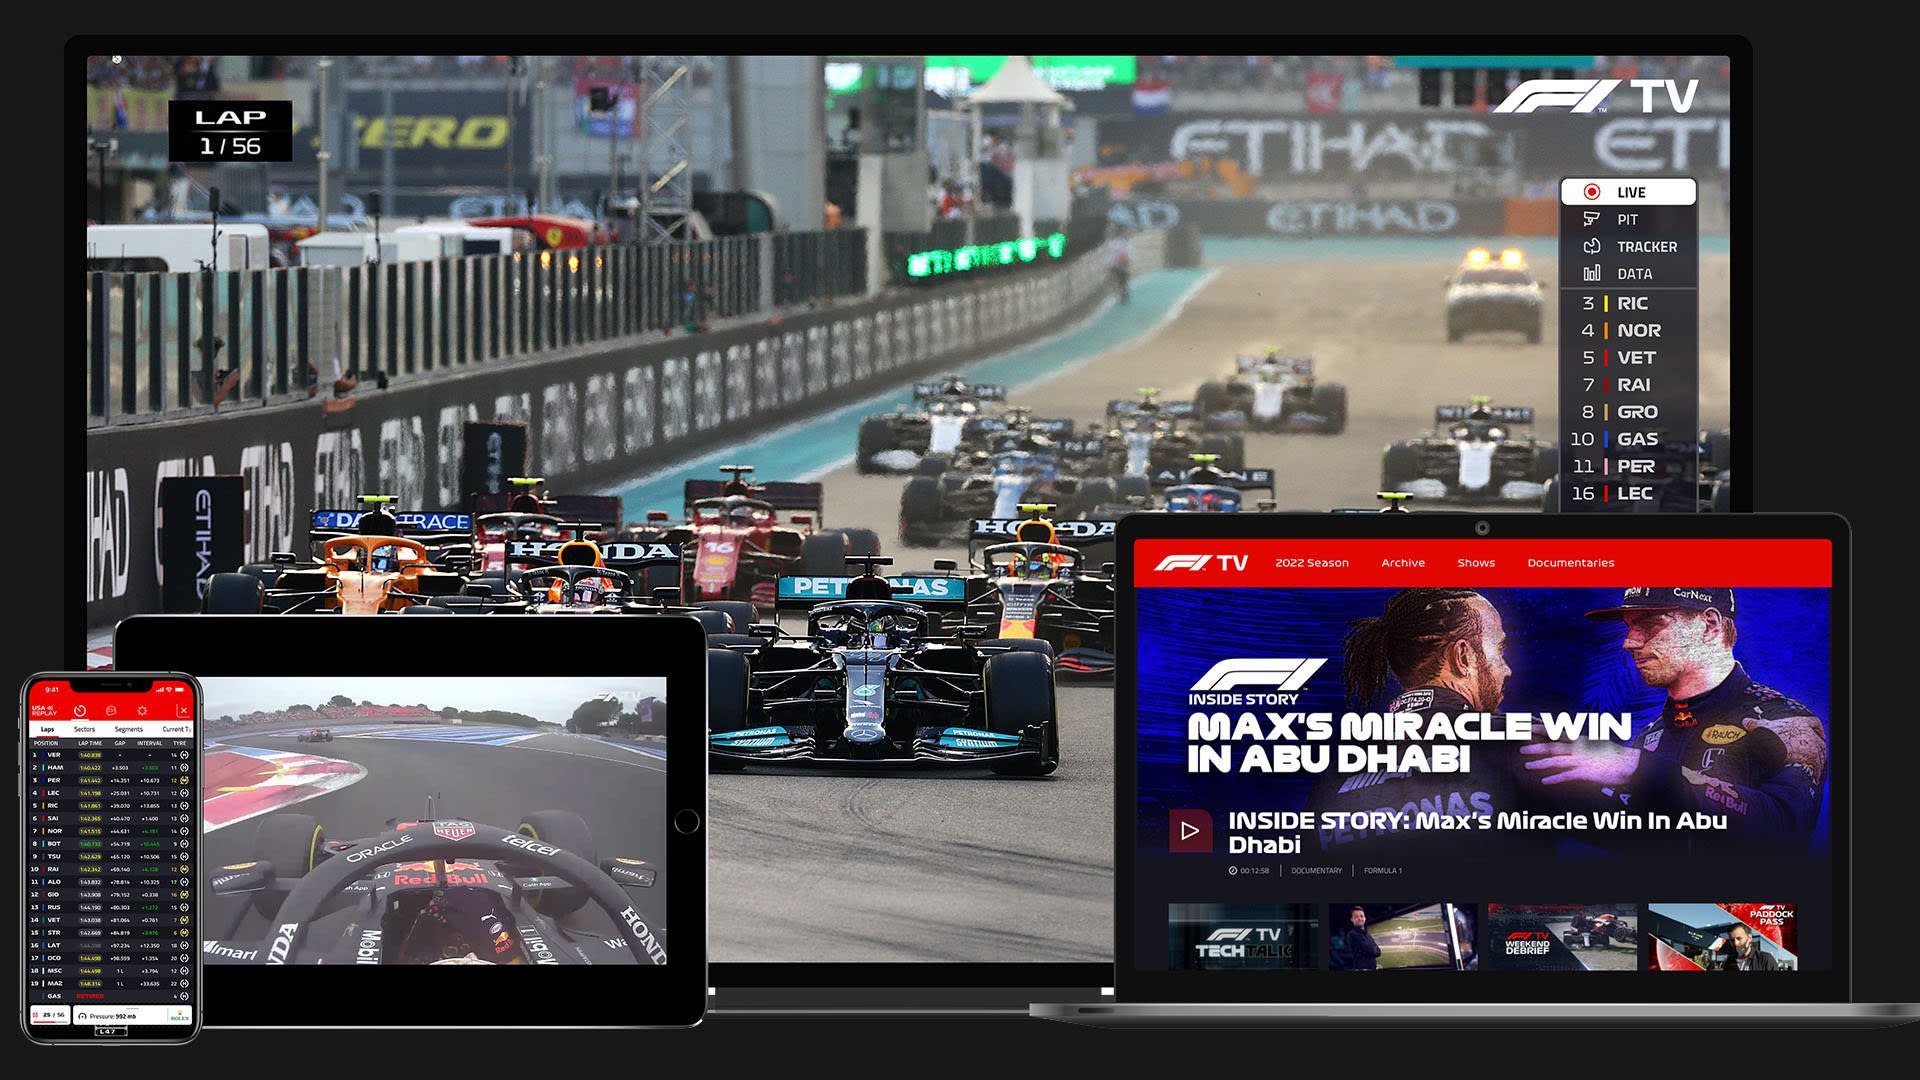 f1 tv can i watch live races